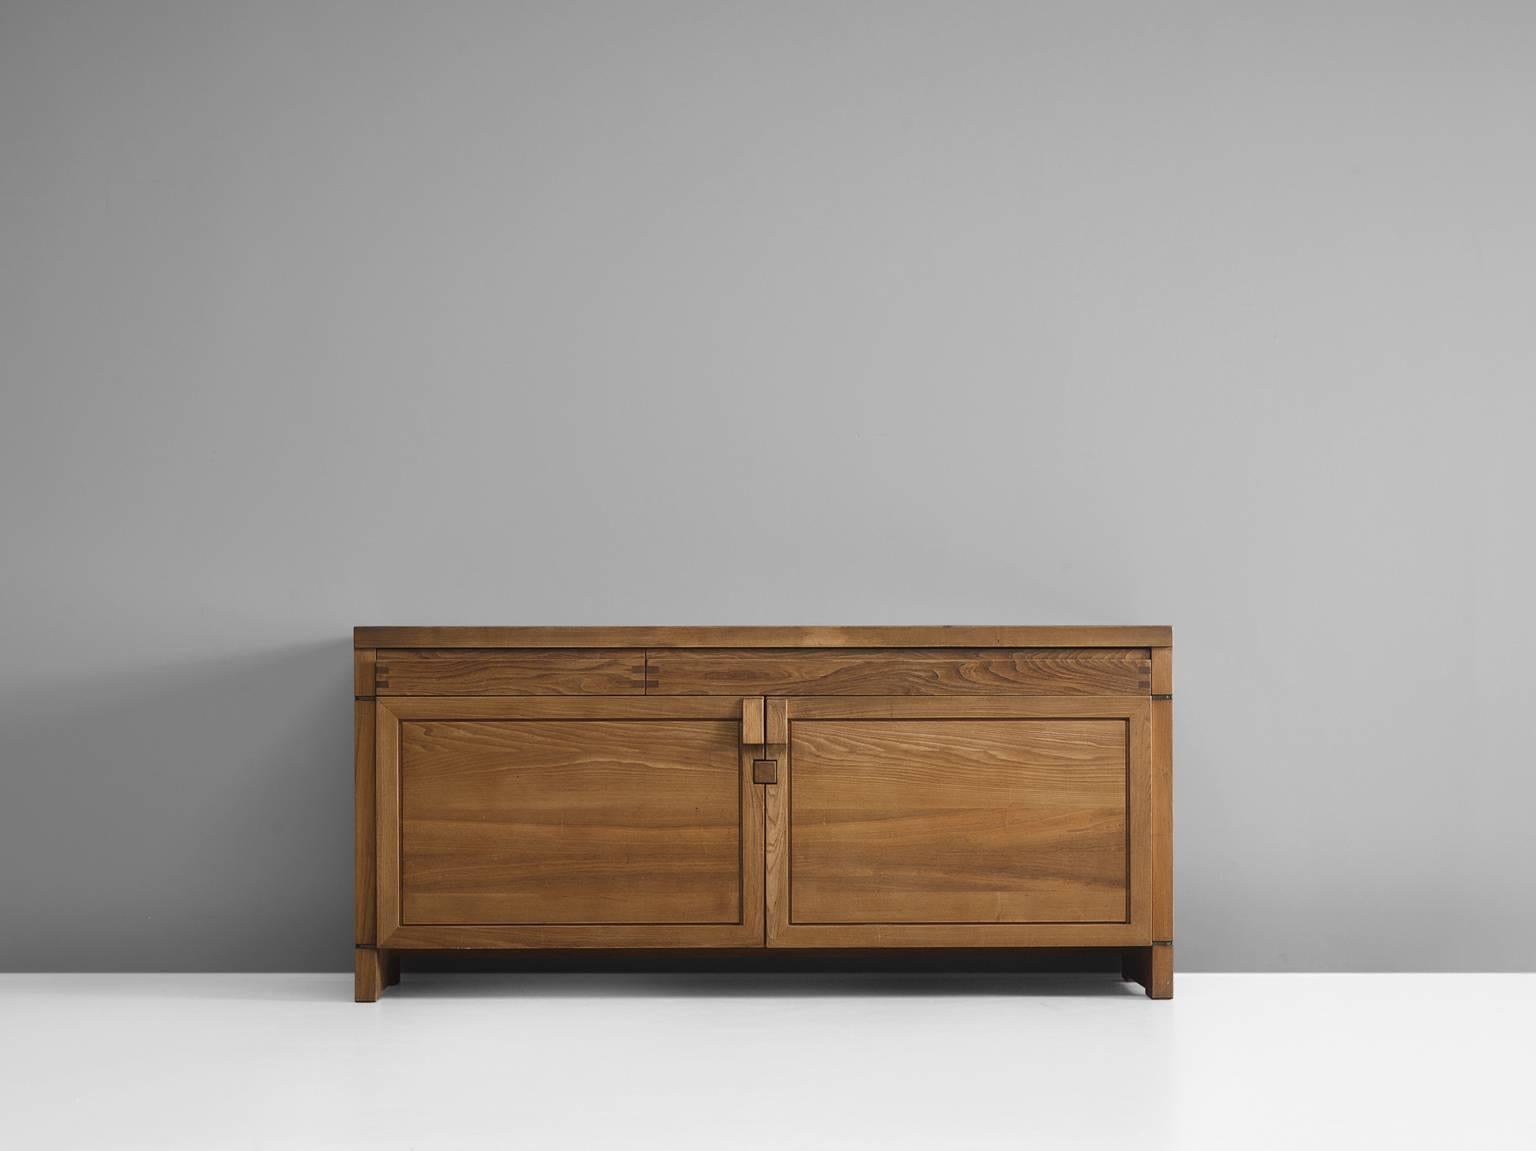 Pierre Chapo, sideboard, Model R08, elm, France, circa 1964.

This exquisitely crafted credenza combines a simplified yet complex design combined with nifty, solid construction details that characterize Chapo's work. The well proportioned doors